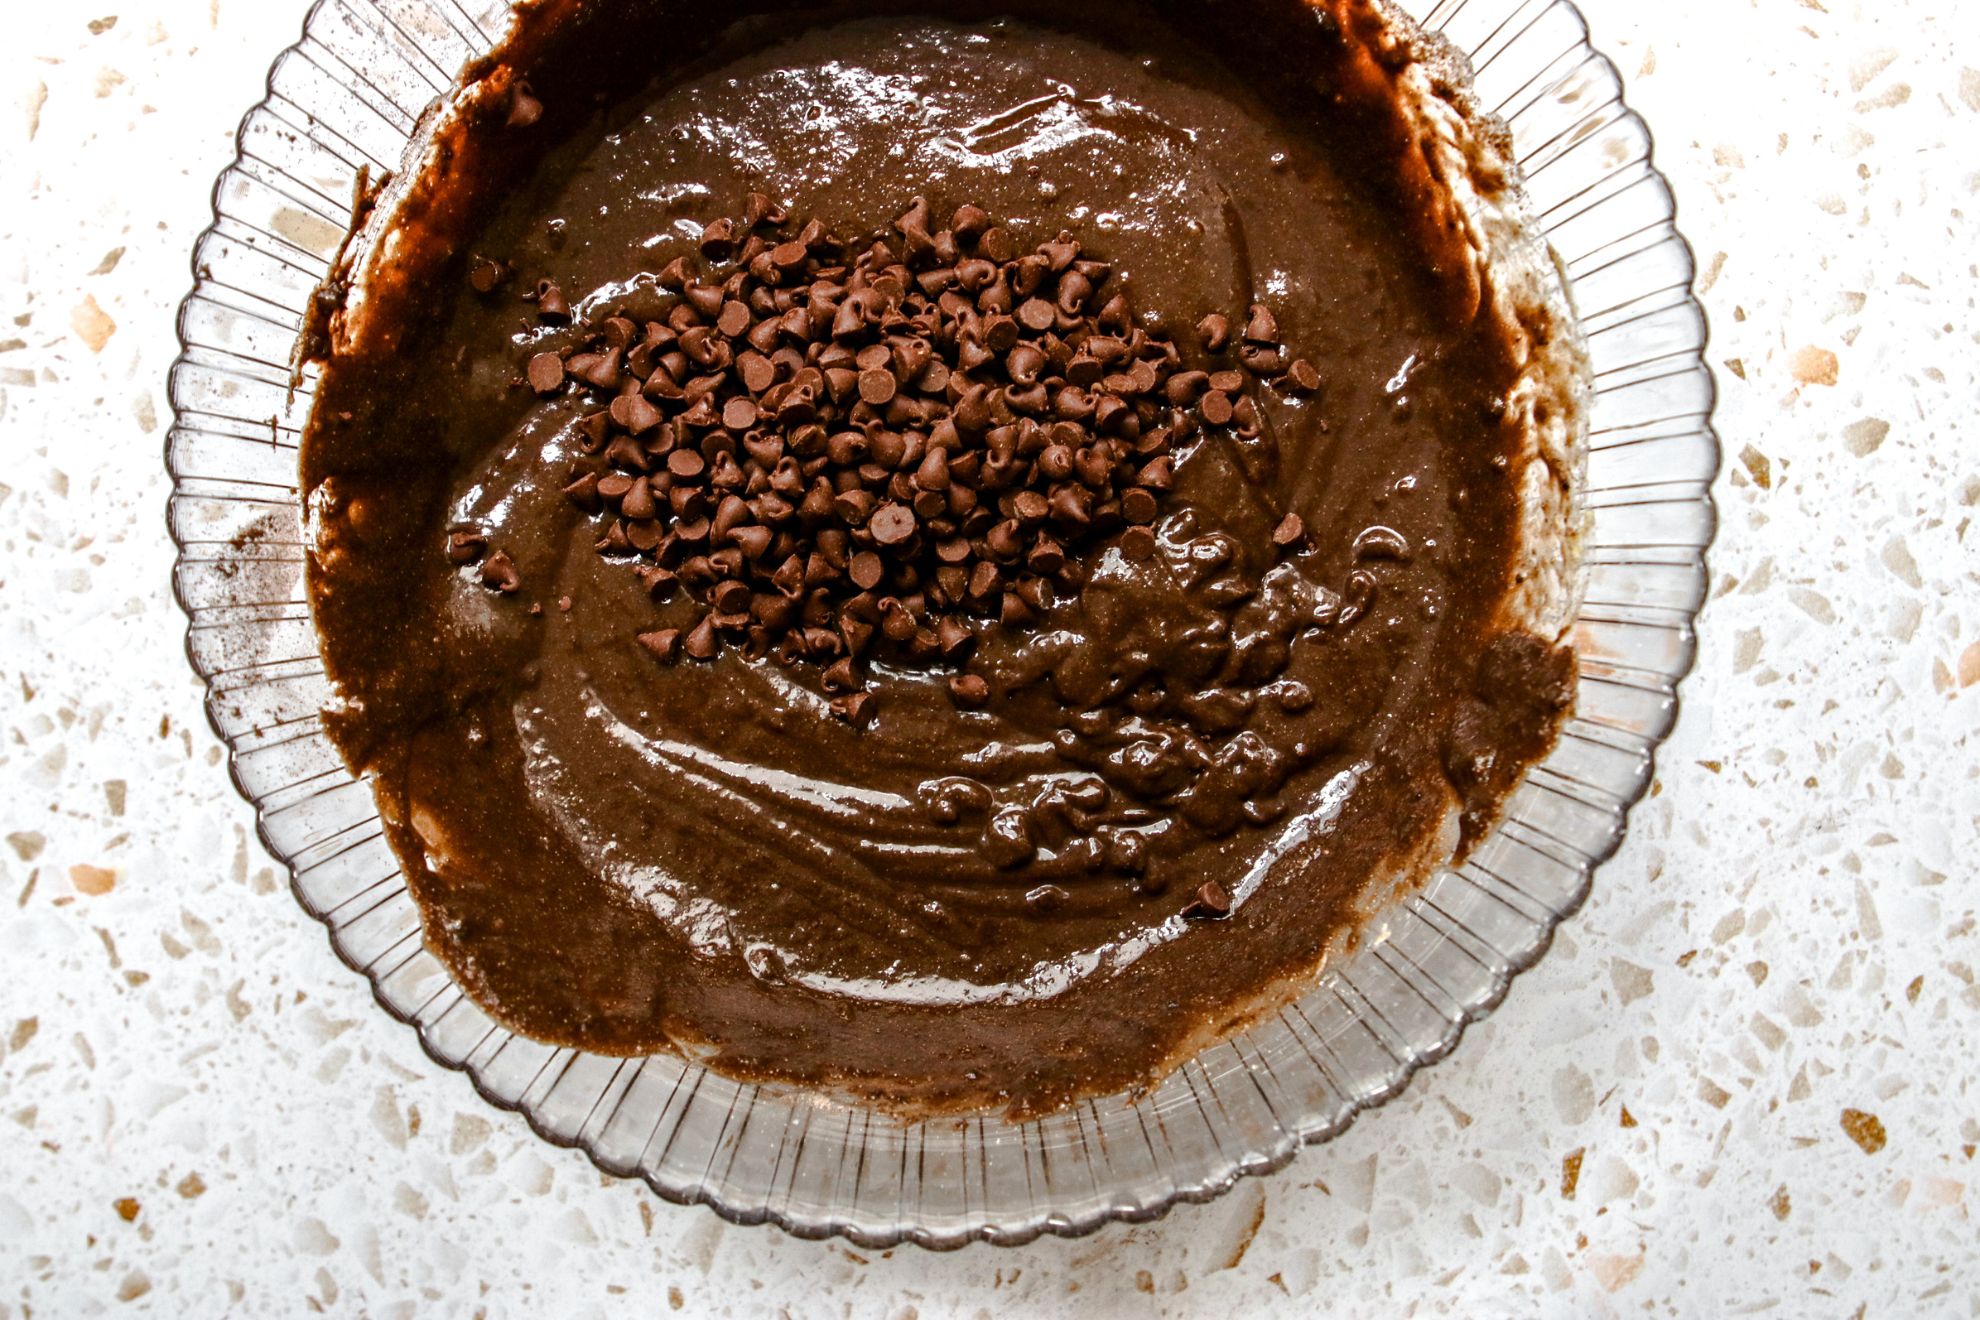 This is an overhead horizontal image of a large glass bowl with scalloped edges on a white terrazzo surface. In the bowl is a raw chocolate batter topped with a mound of mini chocolate chips.